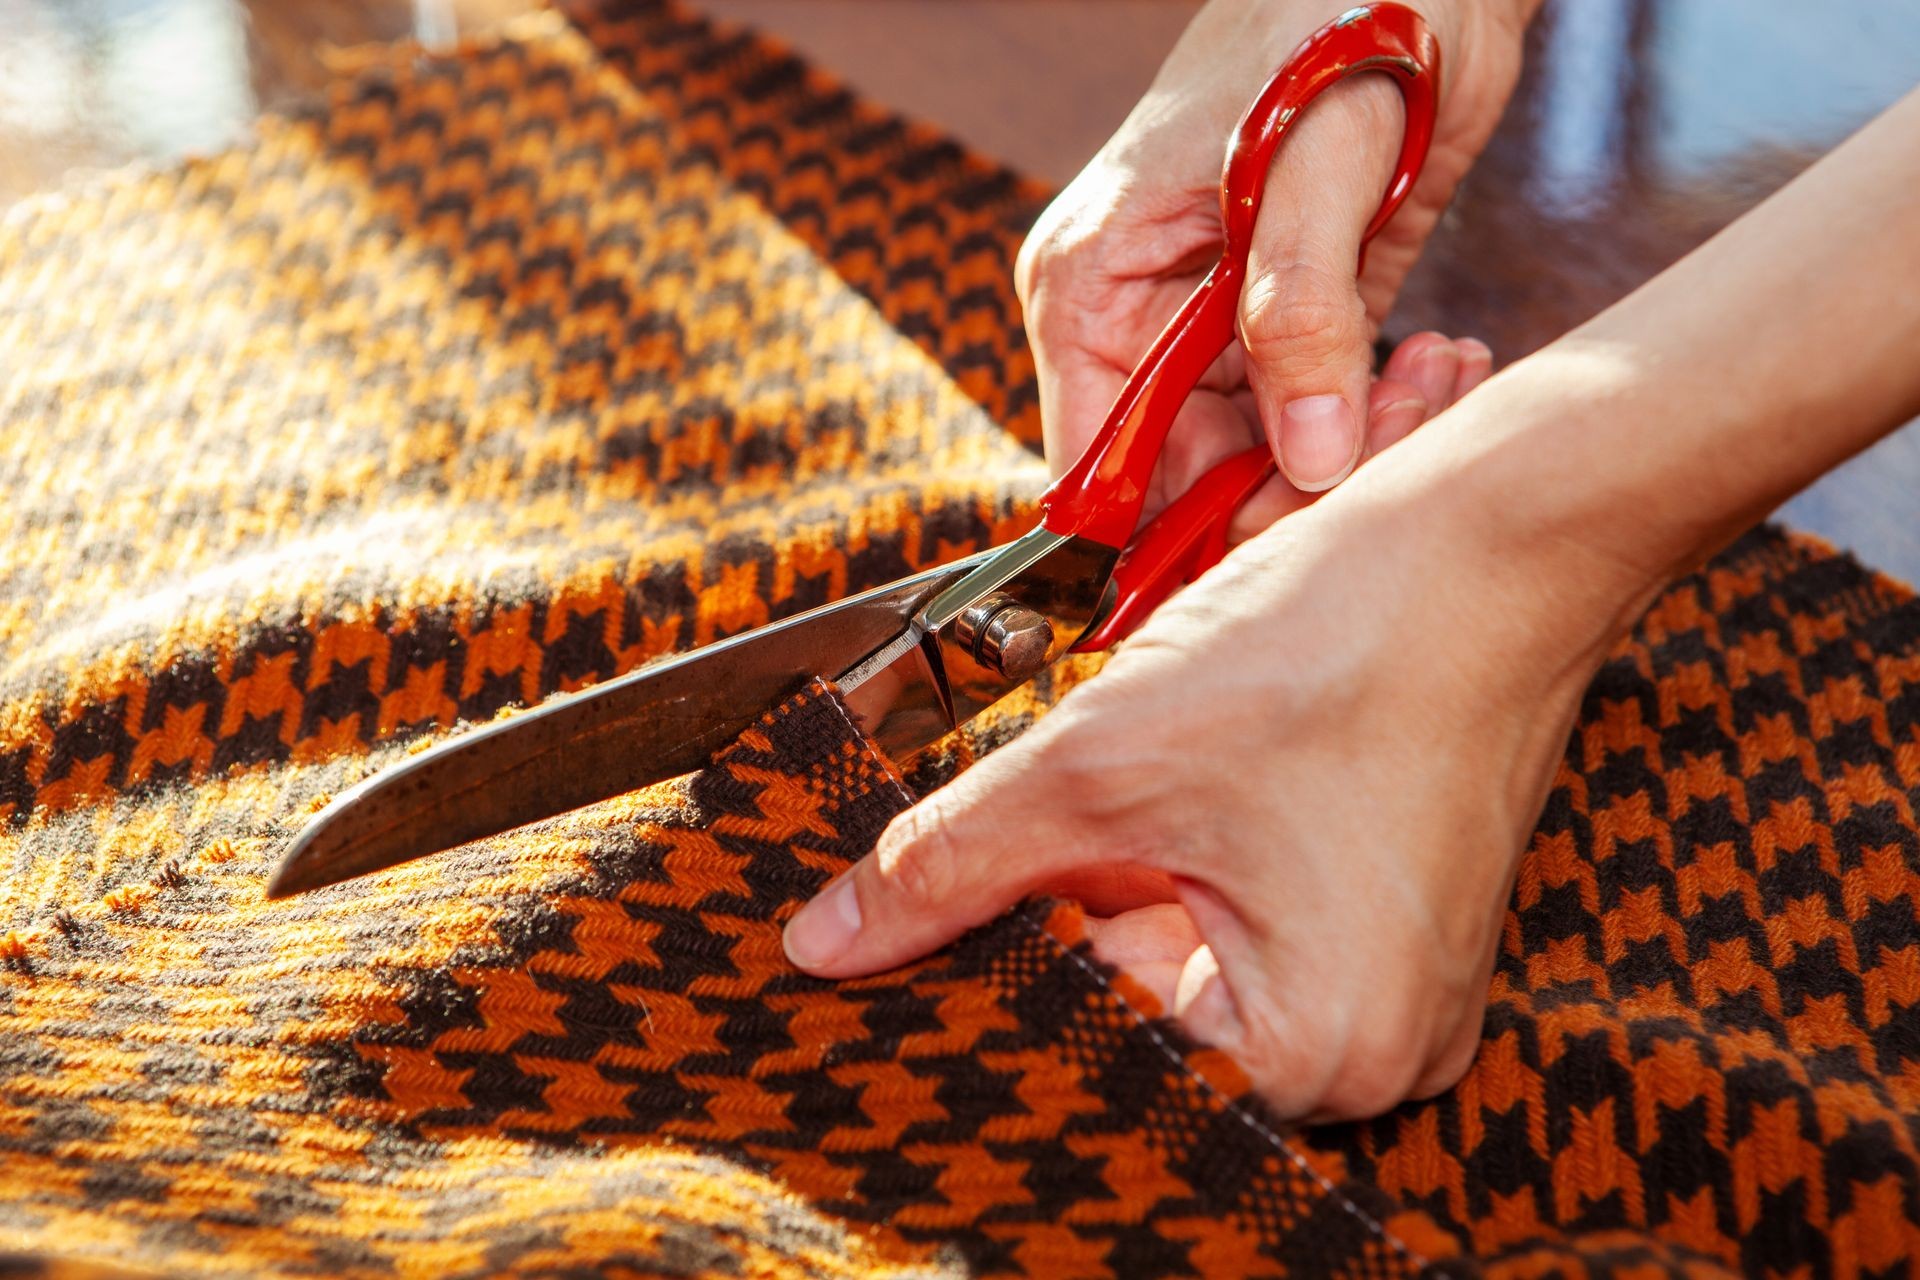 scissor sharpening, shear sharpening, industrial scissors, woman working in a sewing studio: cutting fabric with industrial scissors. Fashion designer upholstery